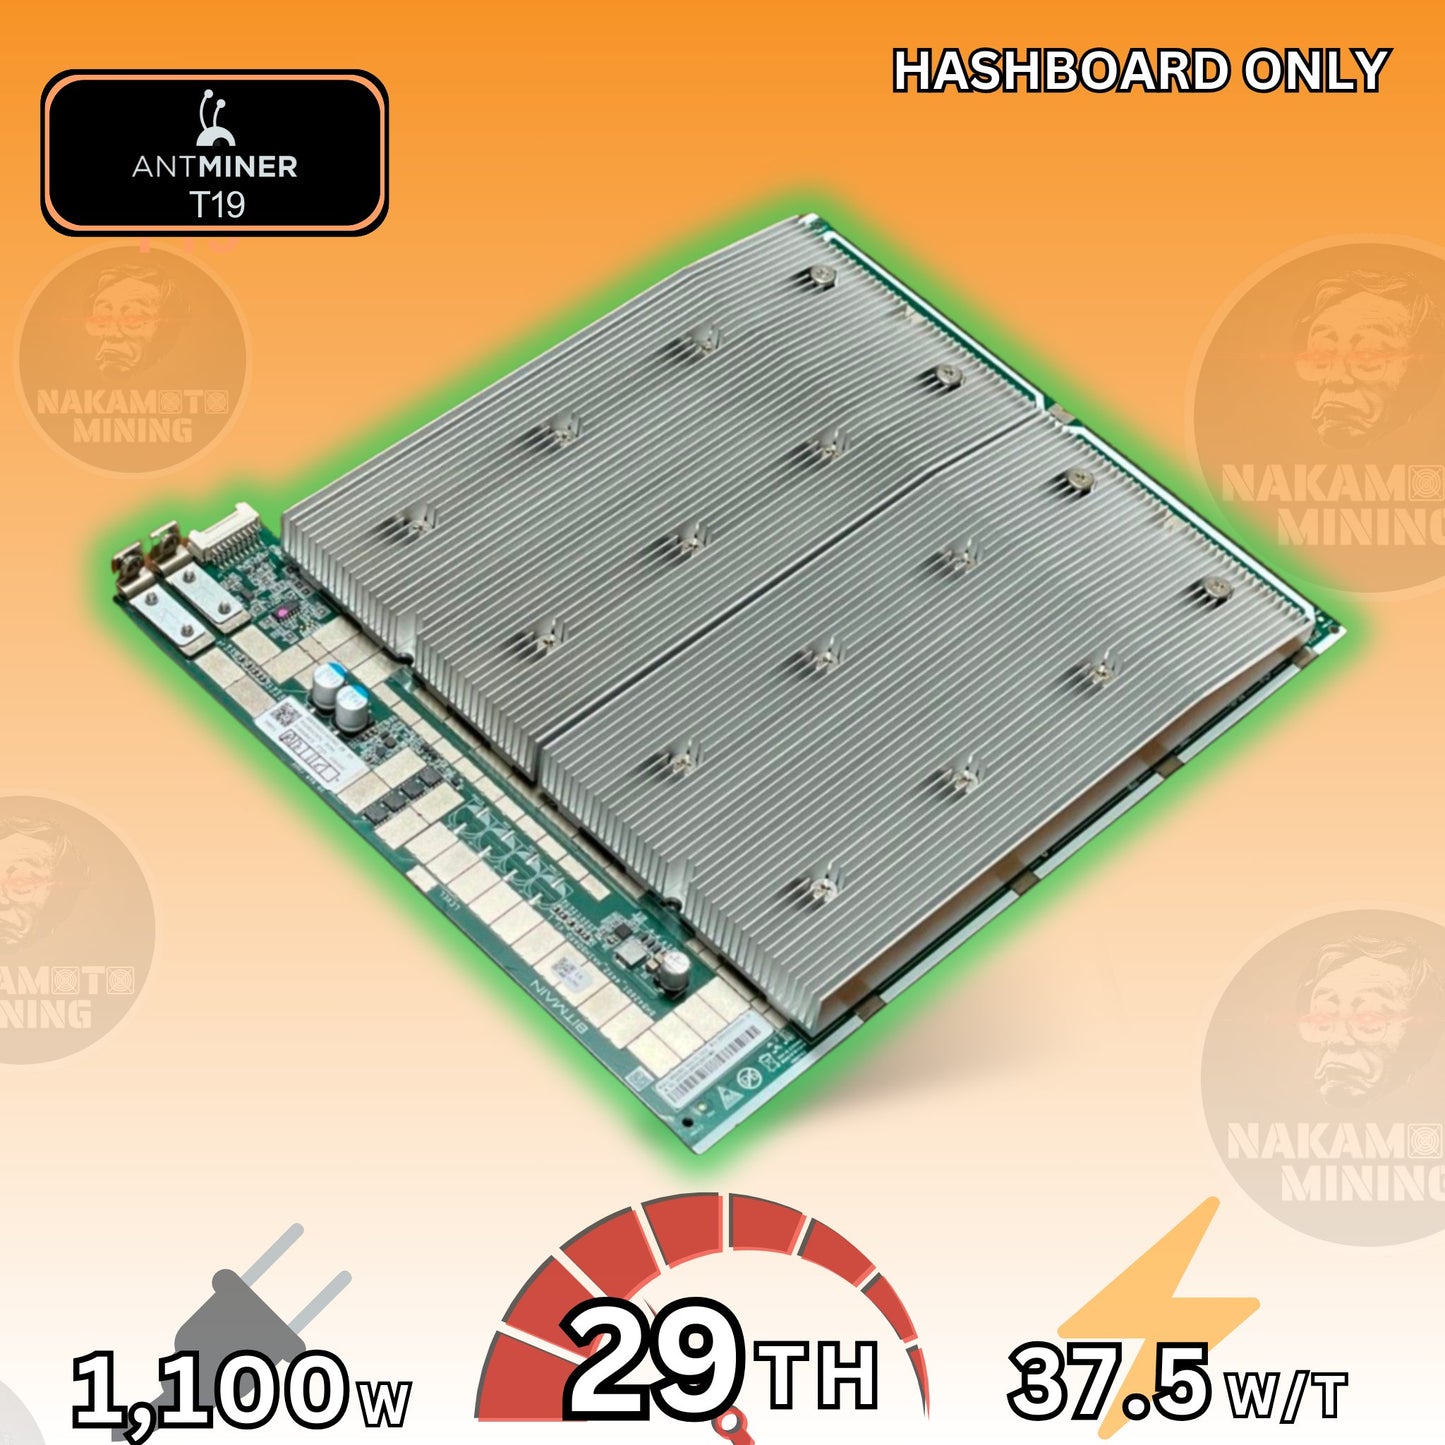 ANTMINER T19 (88TH) — Single Hashboard Only - Nakamoto Mining LTD.